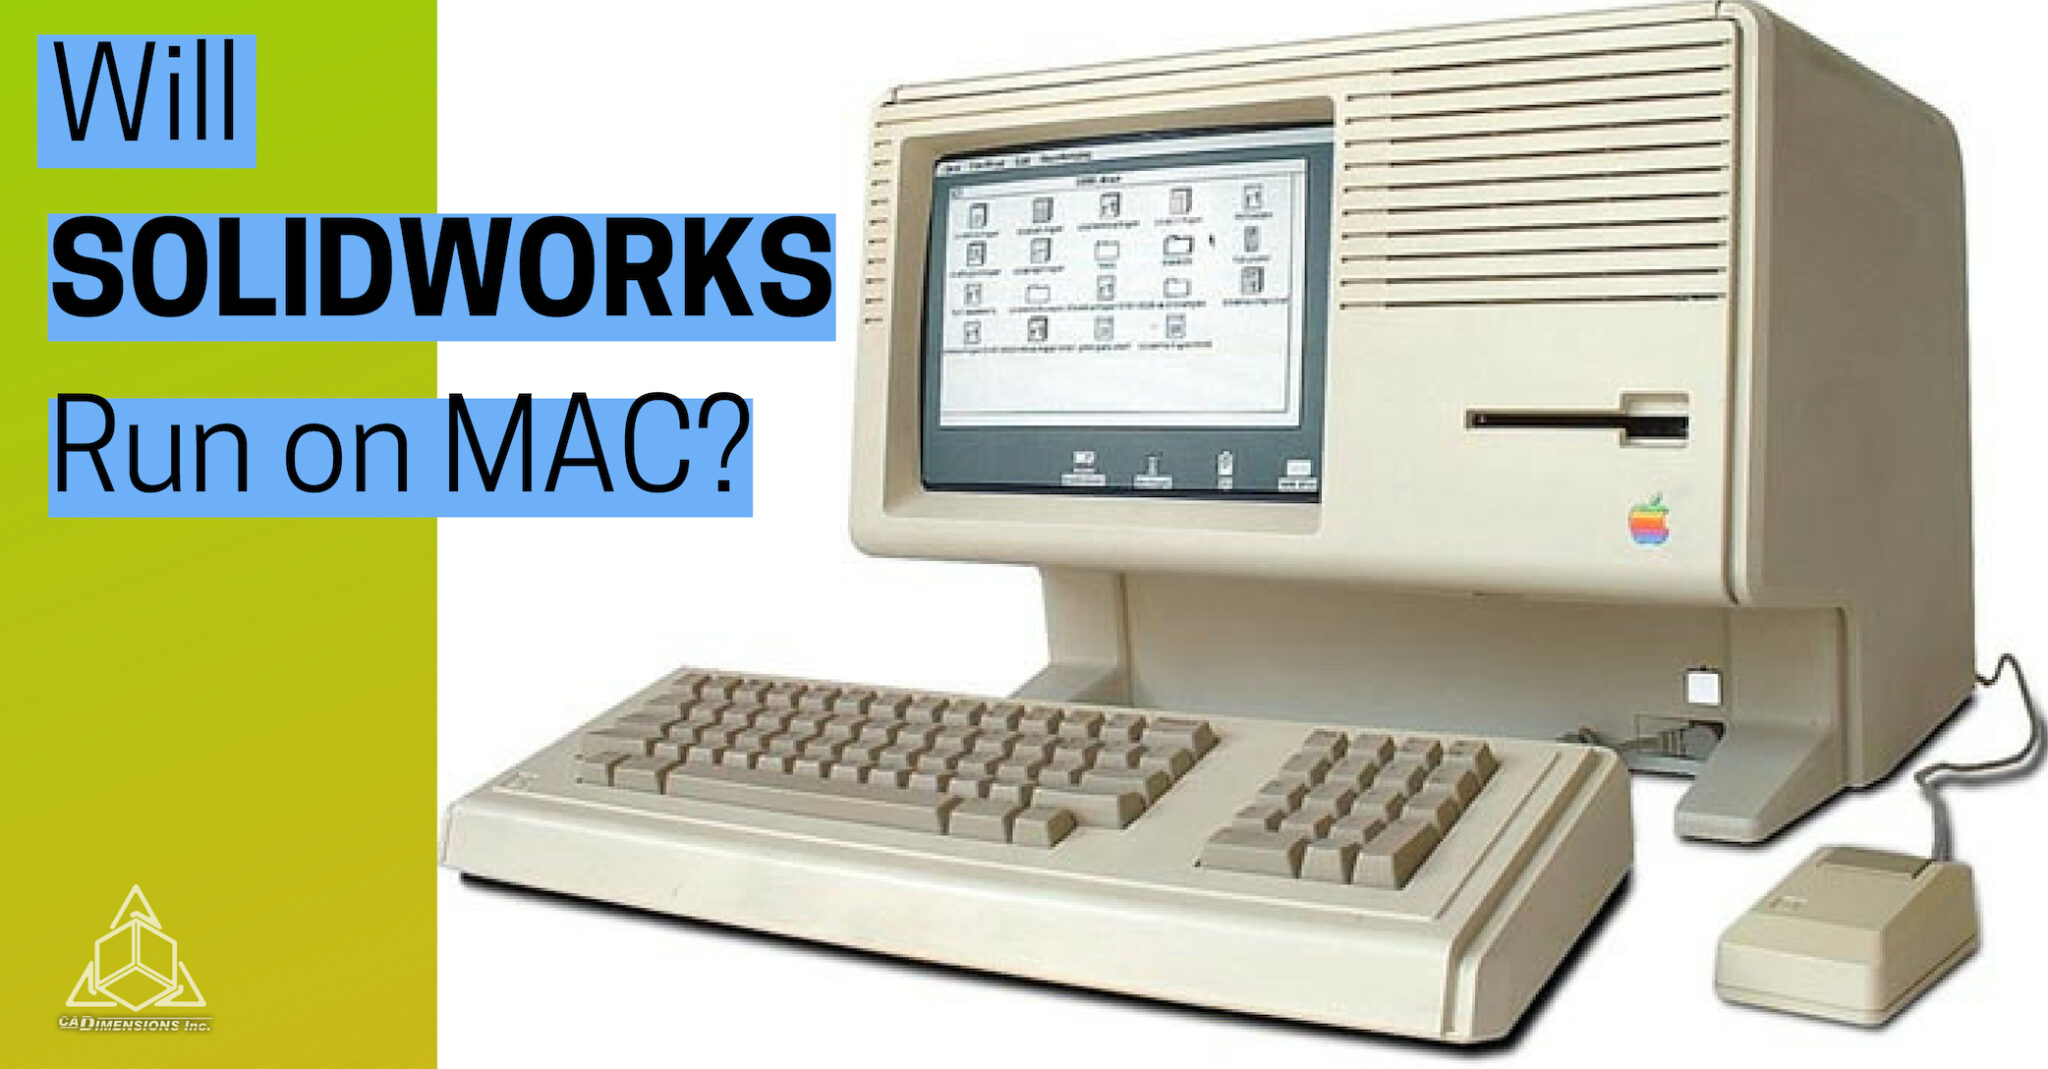 Is there a Solidworks for Mac?